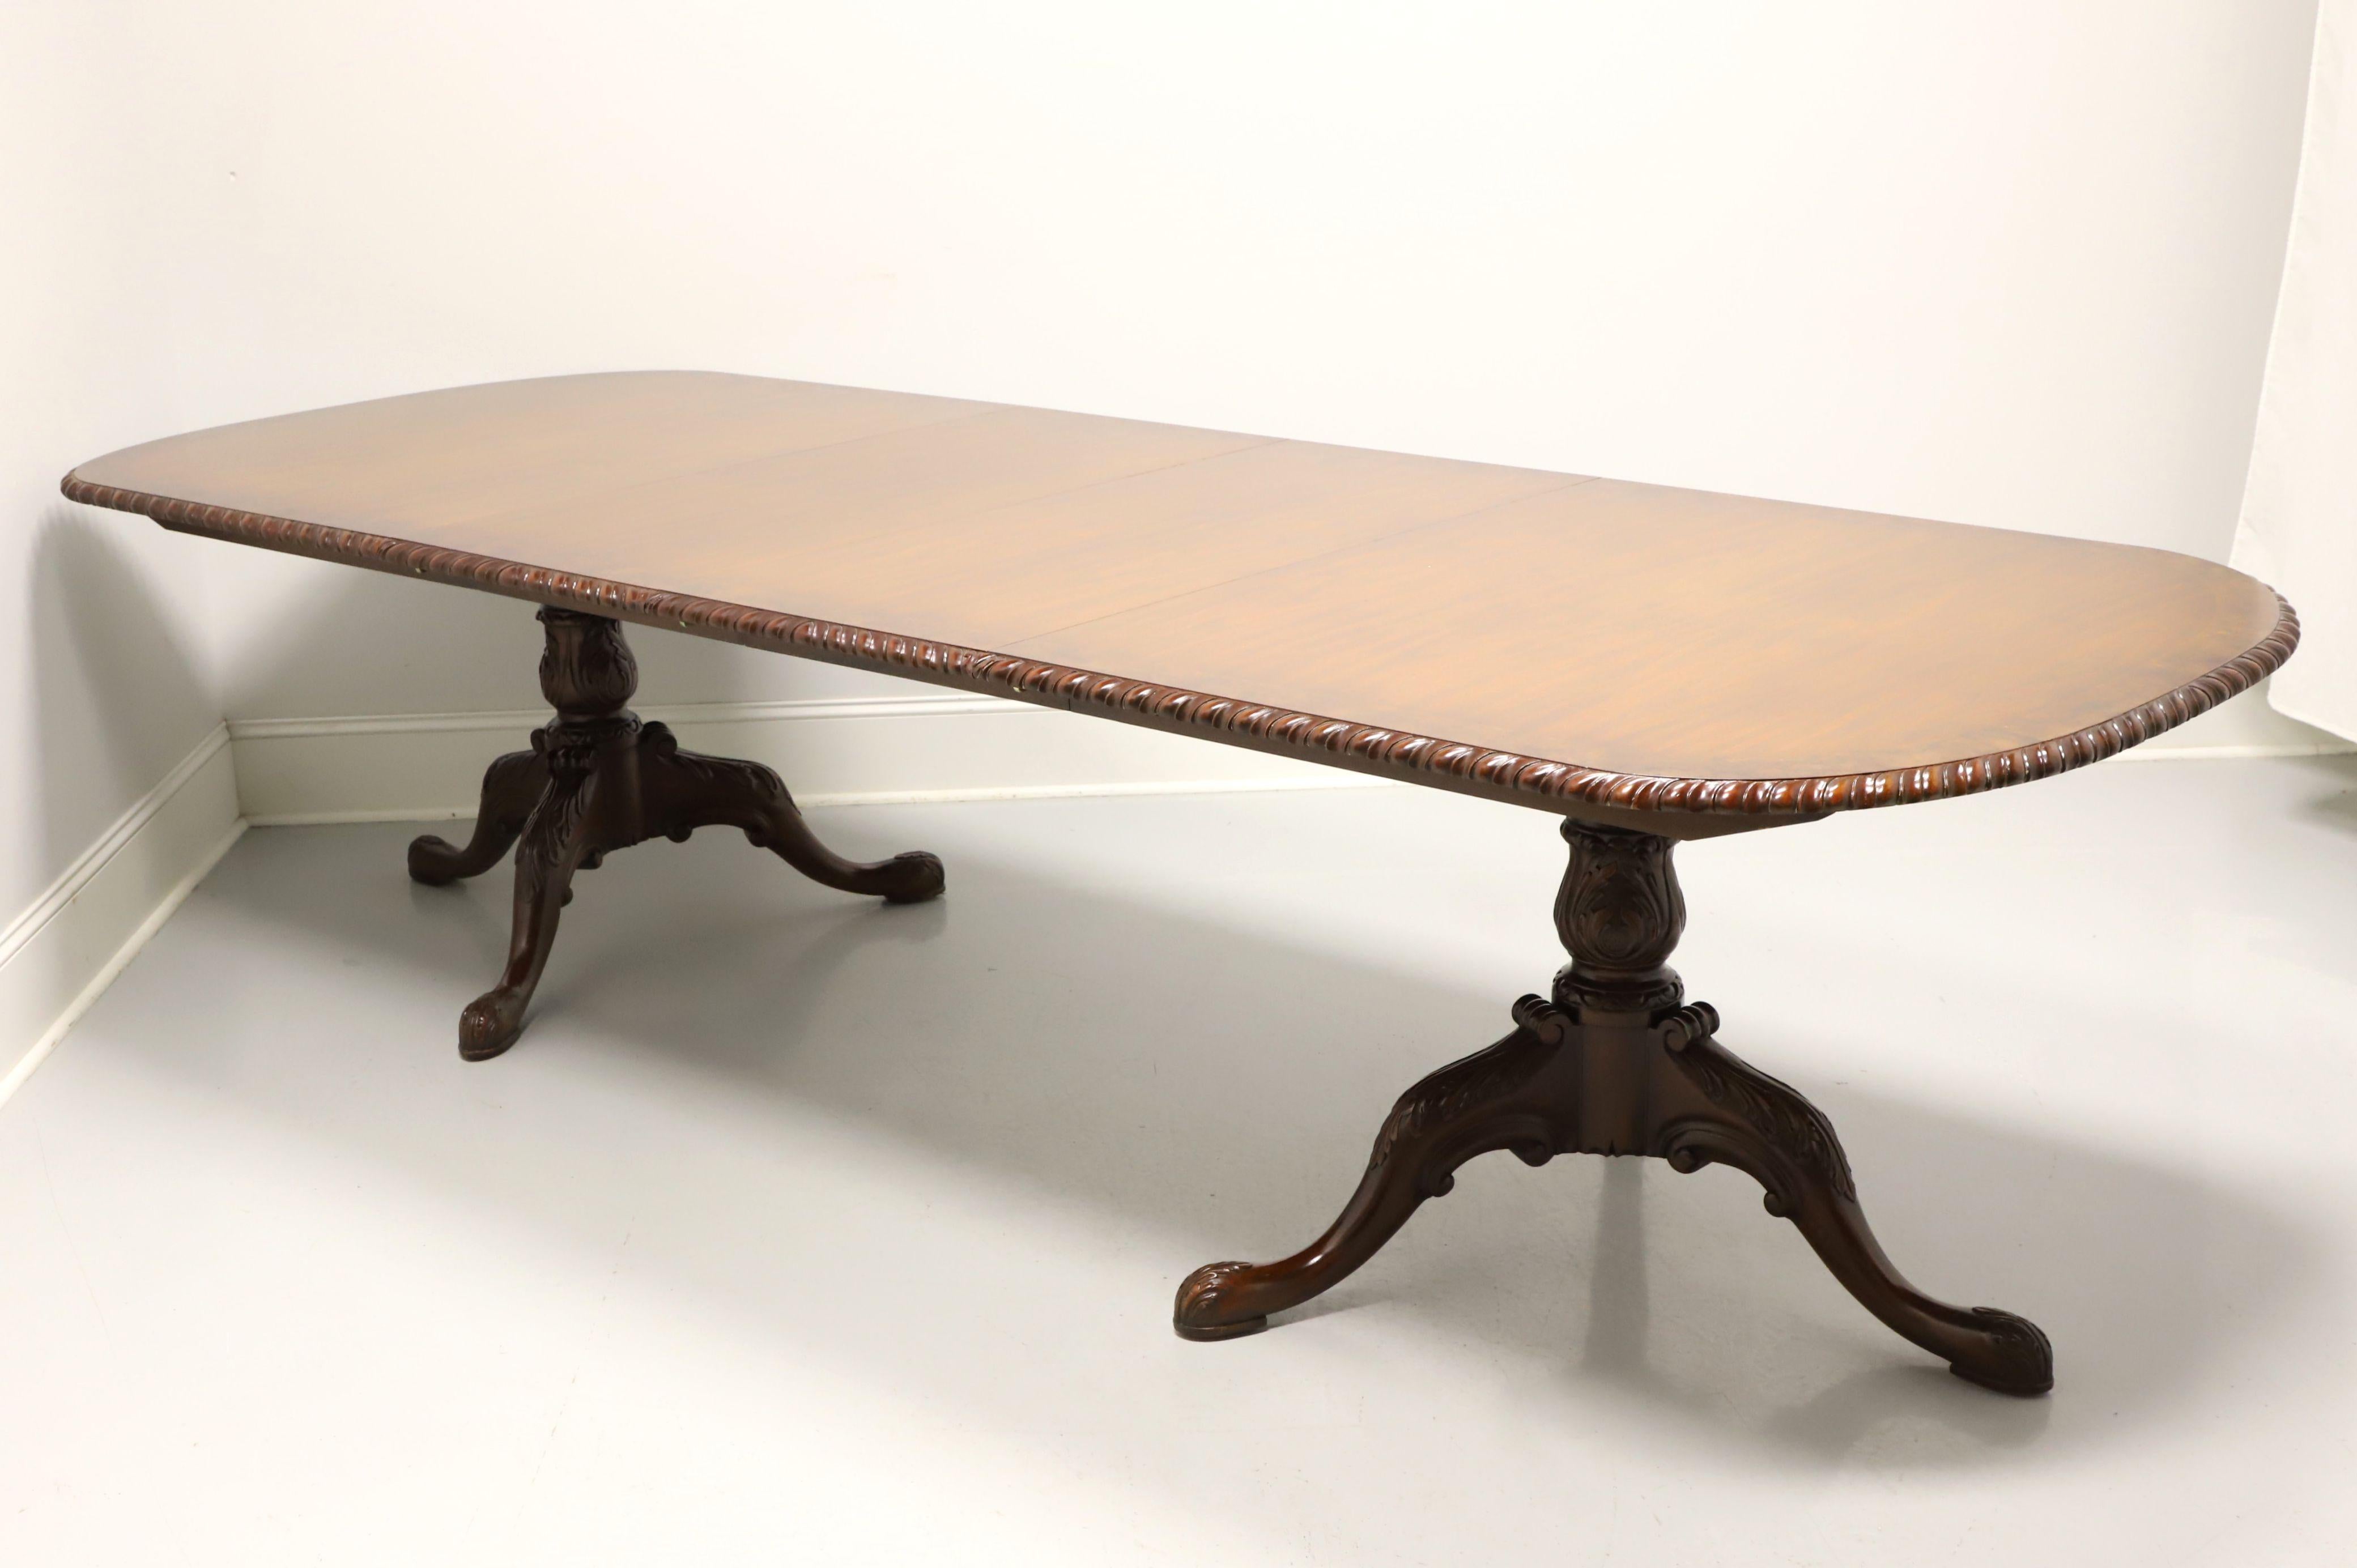 20th Century MAITLAND SMITH Walnut Burl Banded Gadroon Edge Double Pedestal Dining Table